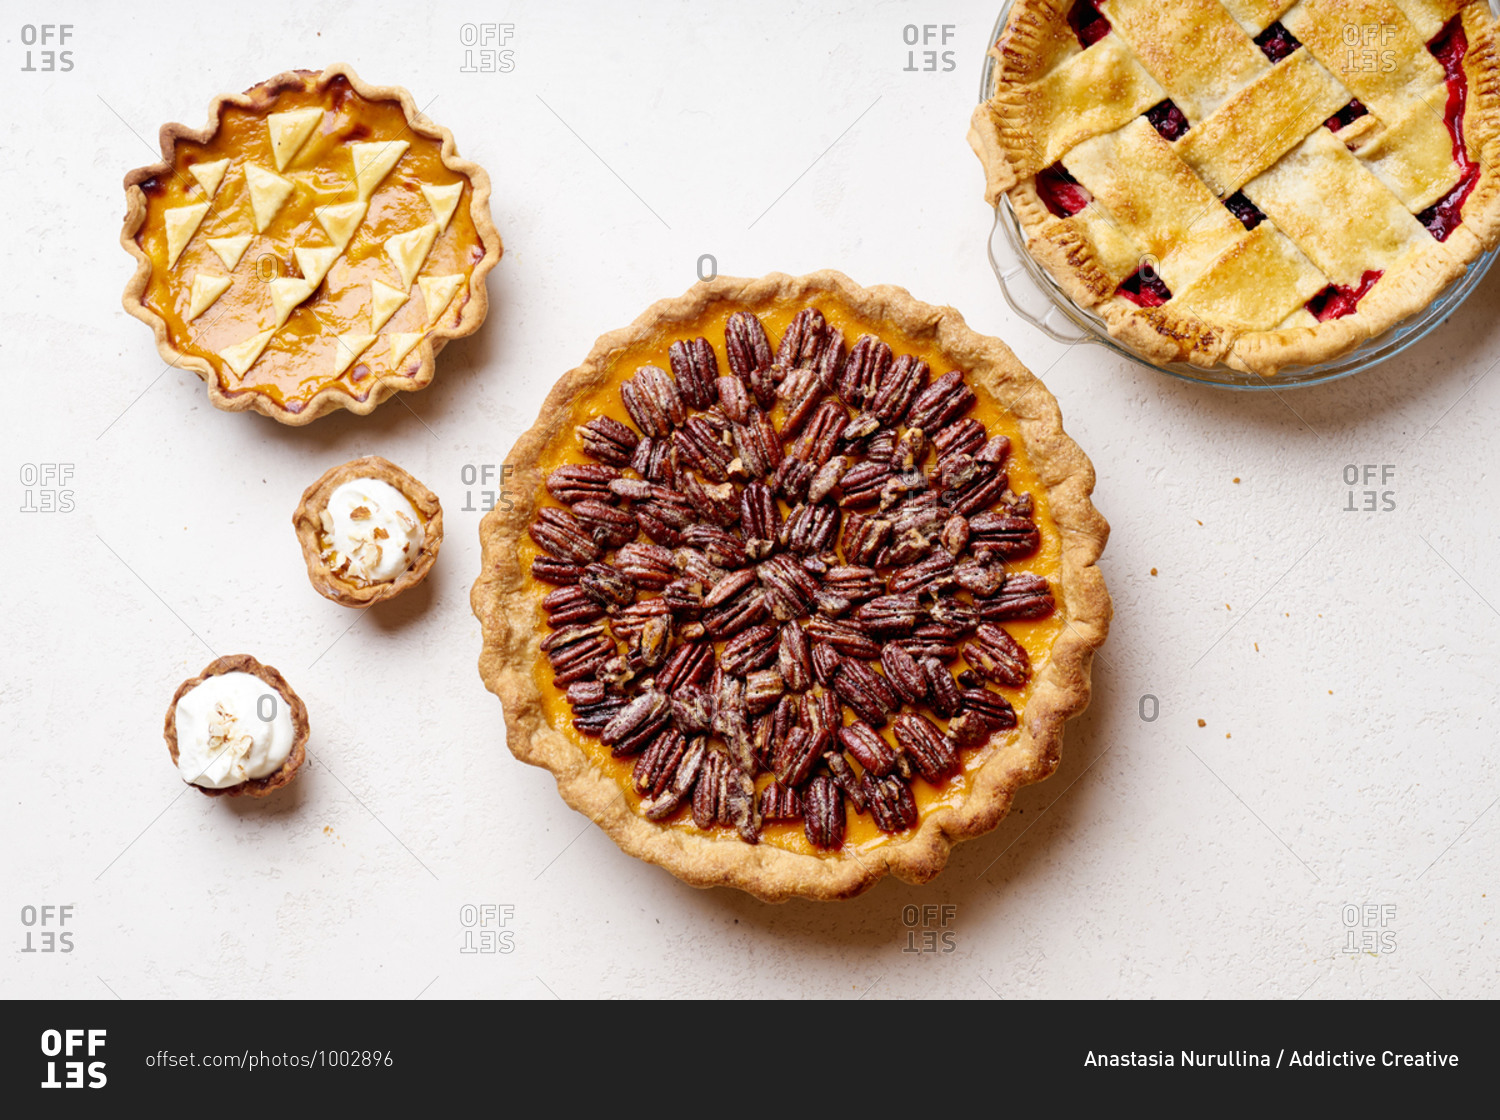 Variety of thanksgiving pies with berries, pumpkin and pecan